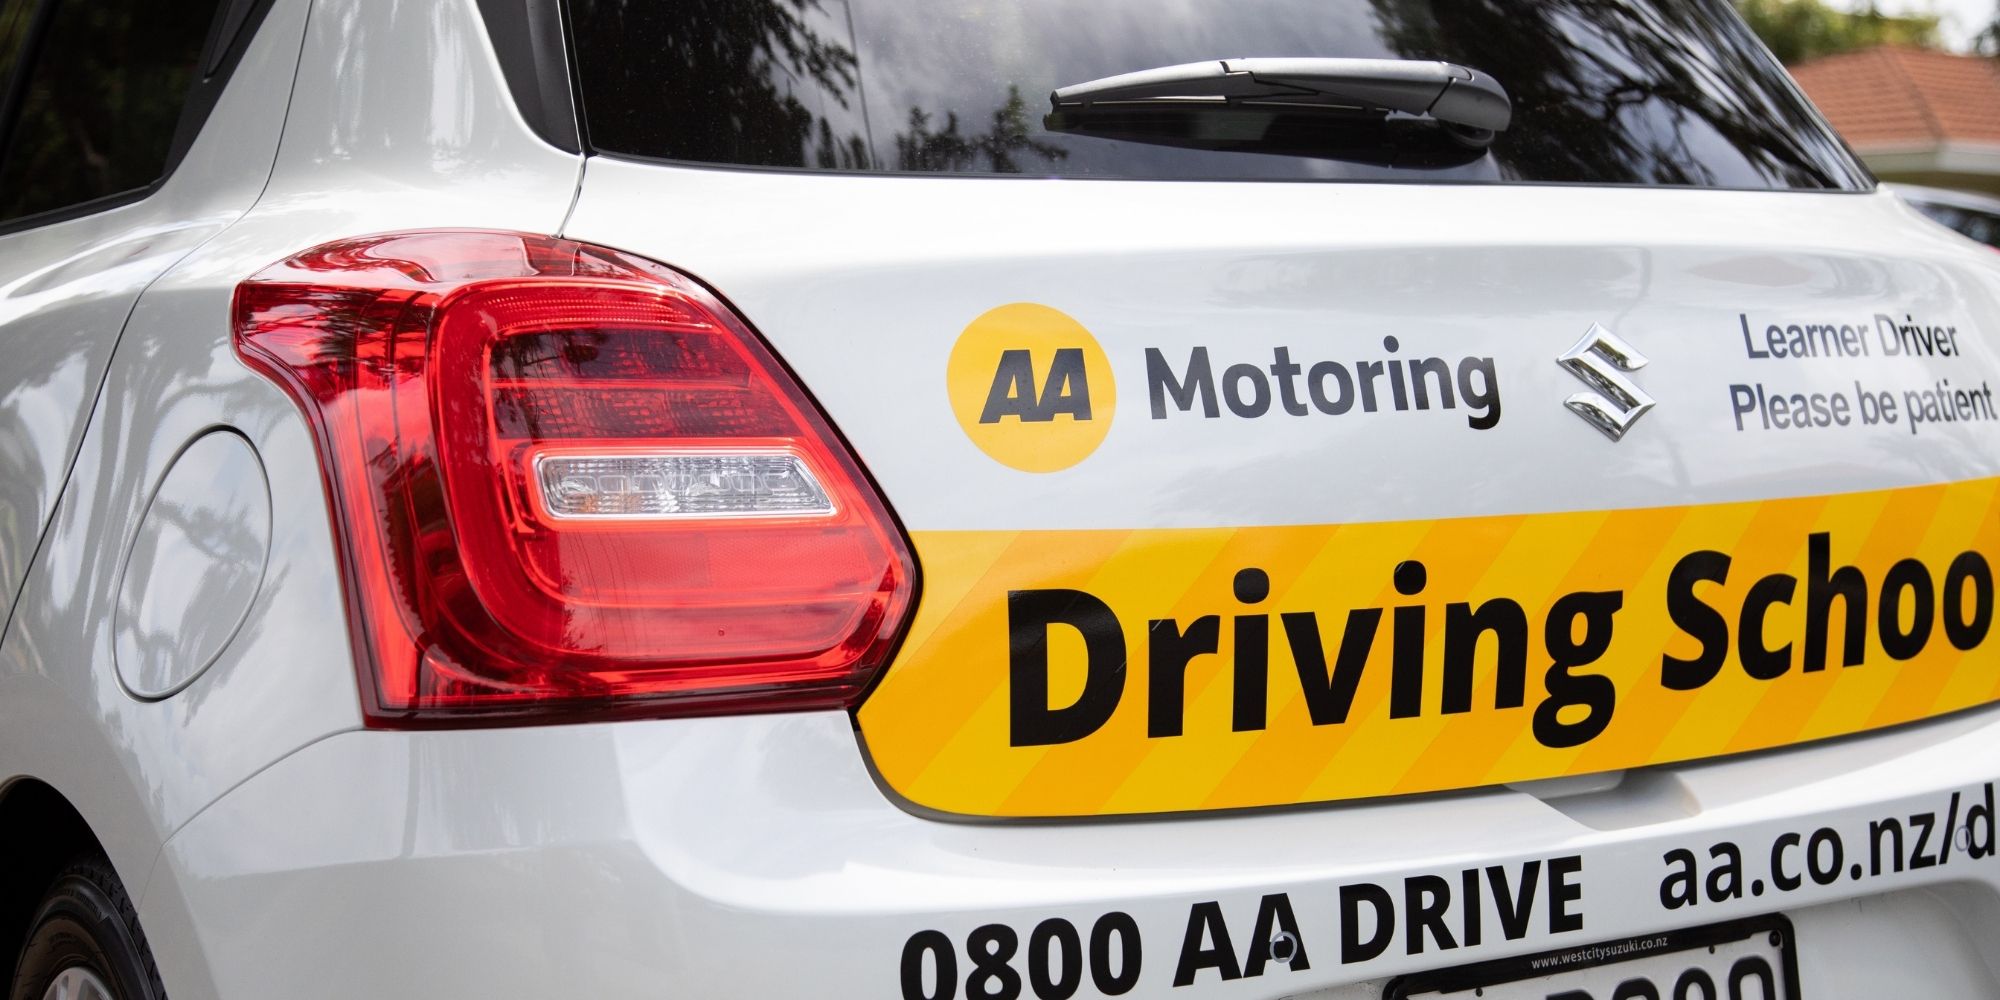 AA Driving Lessons Practice full licence test 2